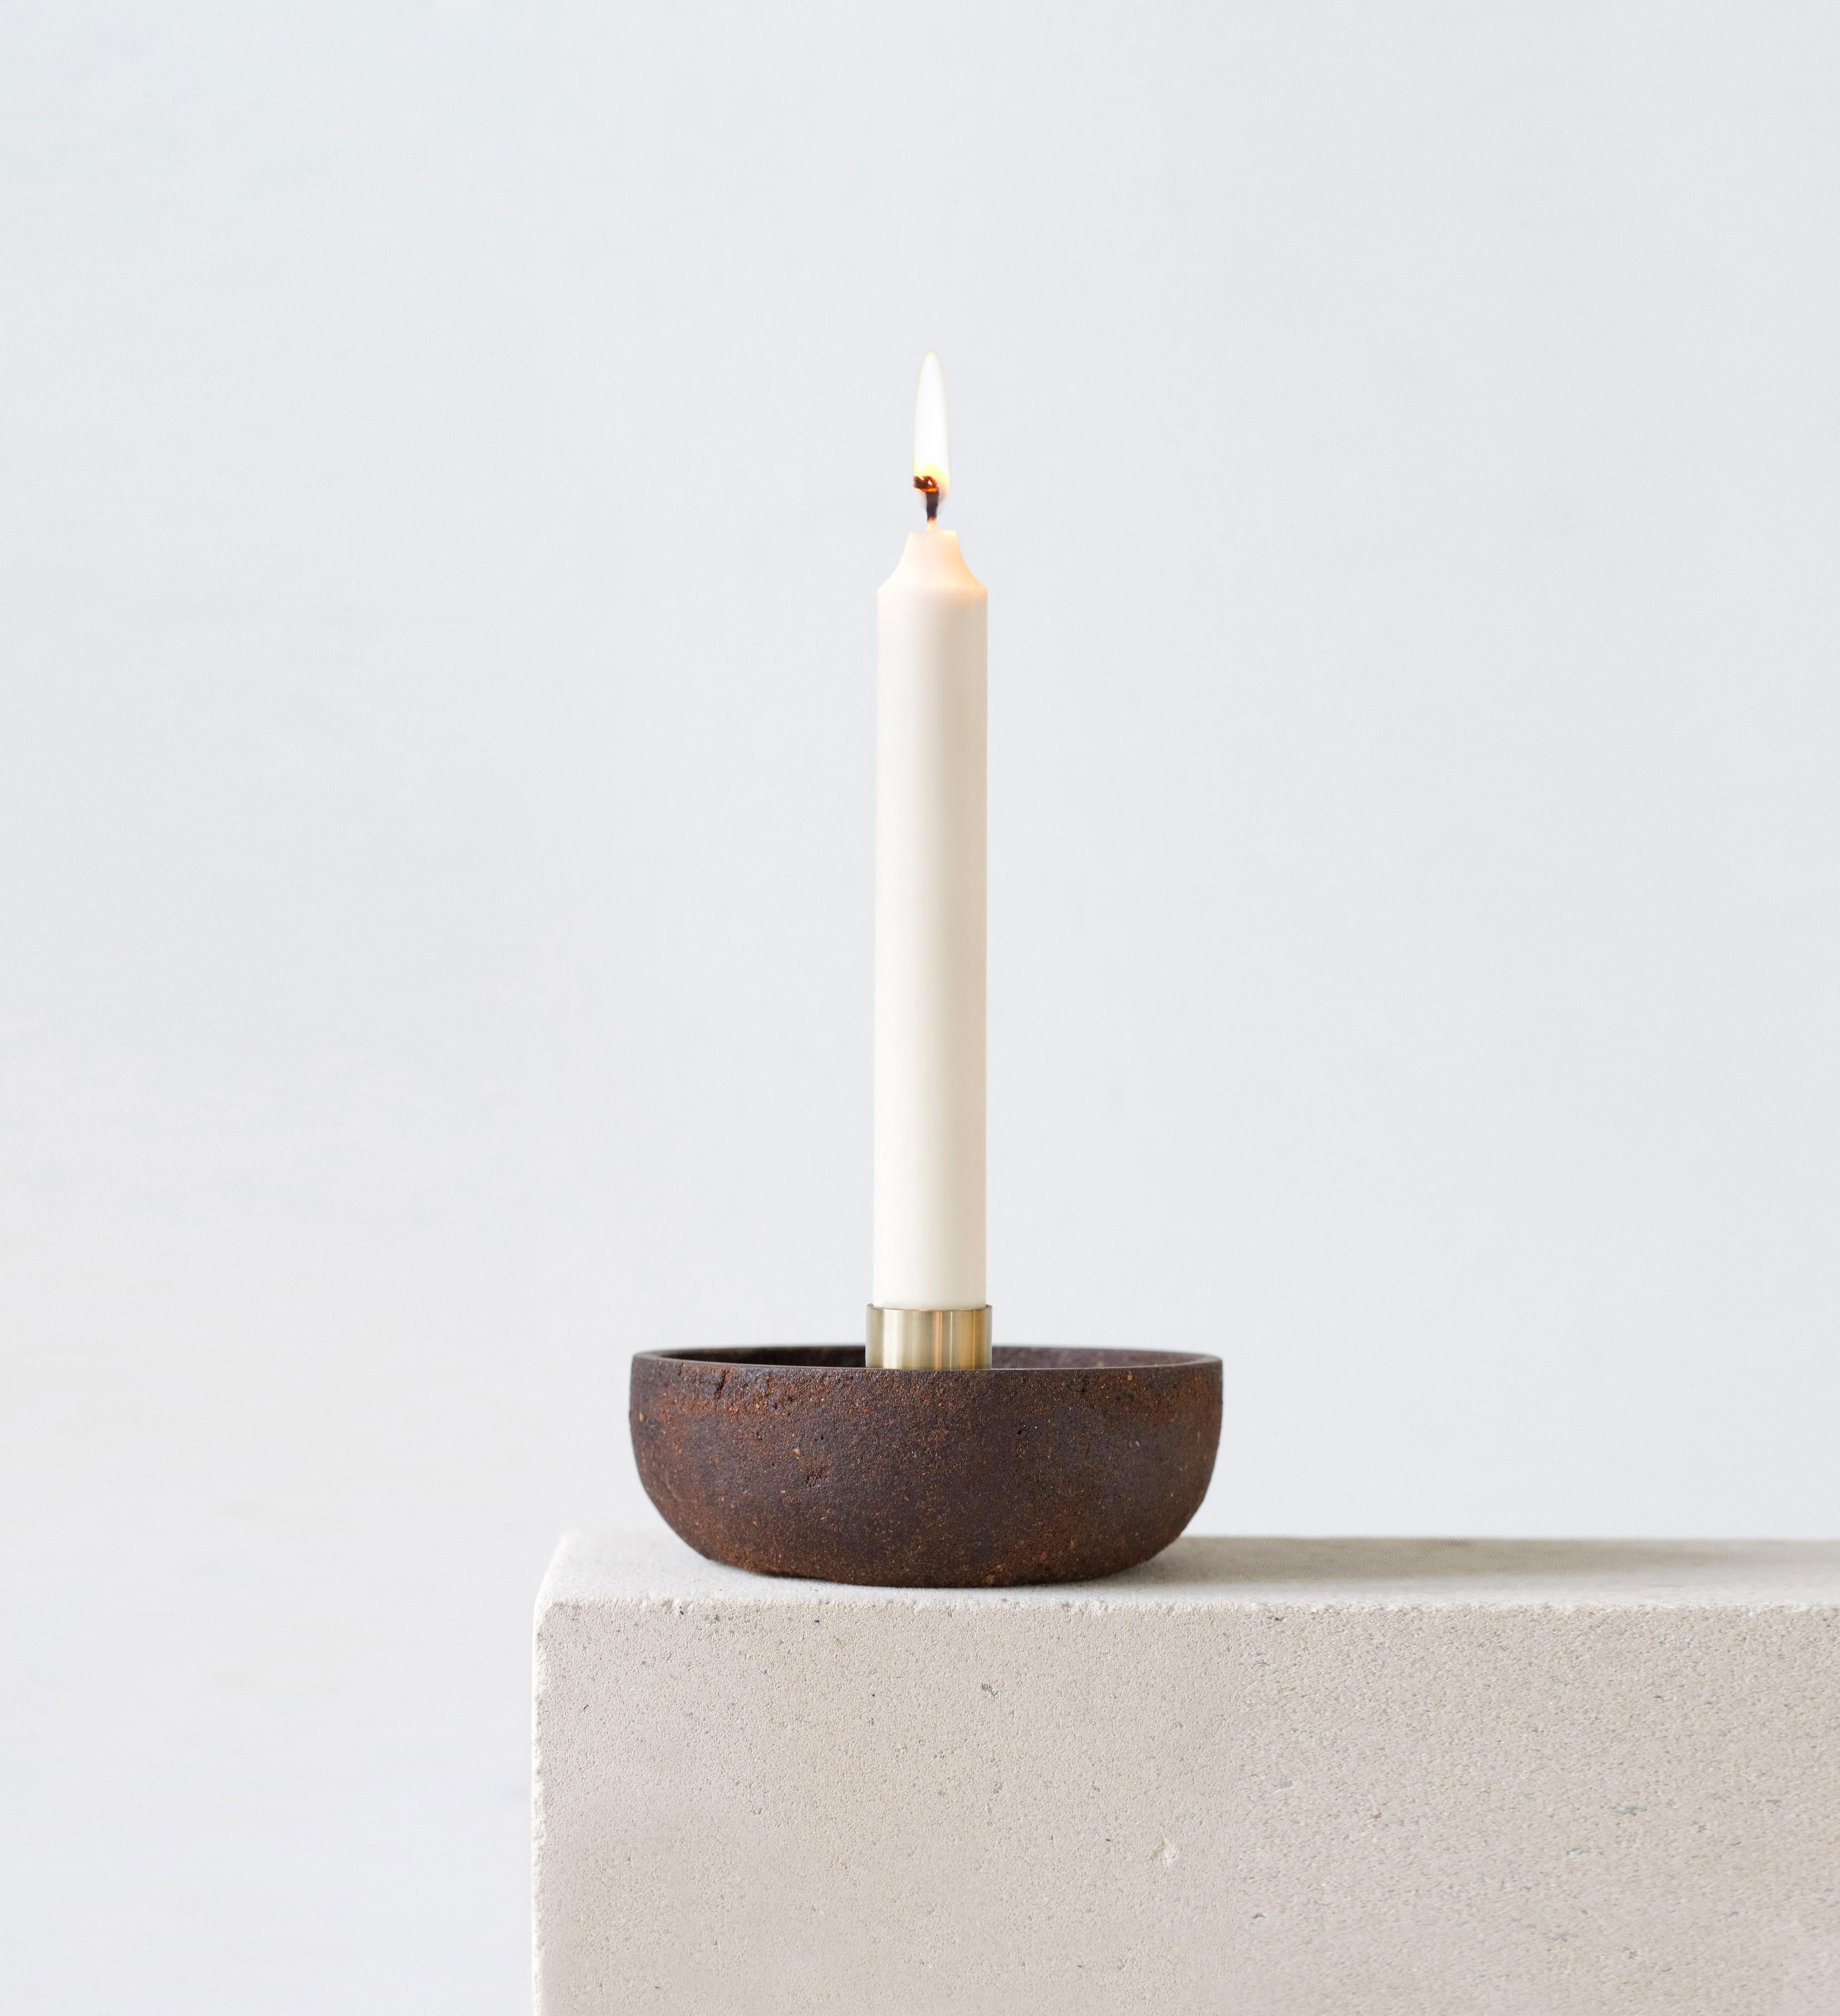 Pine candlestick holder by Evelina Kudabaite Studio
Handmade
Materials: Pine bark, brass
Dimensions: H 45 mm x D 105 mm
Colour: Reddish
Notes: For dry use

Since 2015, product designer Evelina Kudabaite keeps on developing and making GIRIA